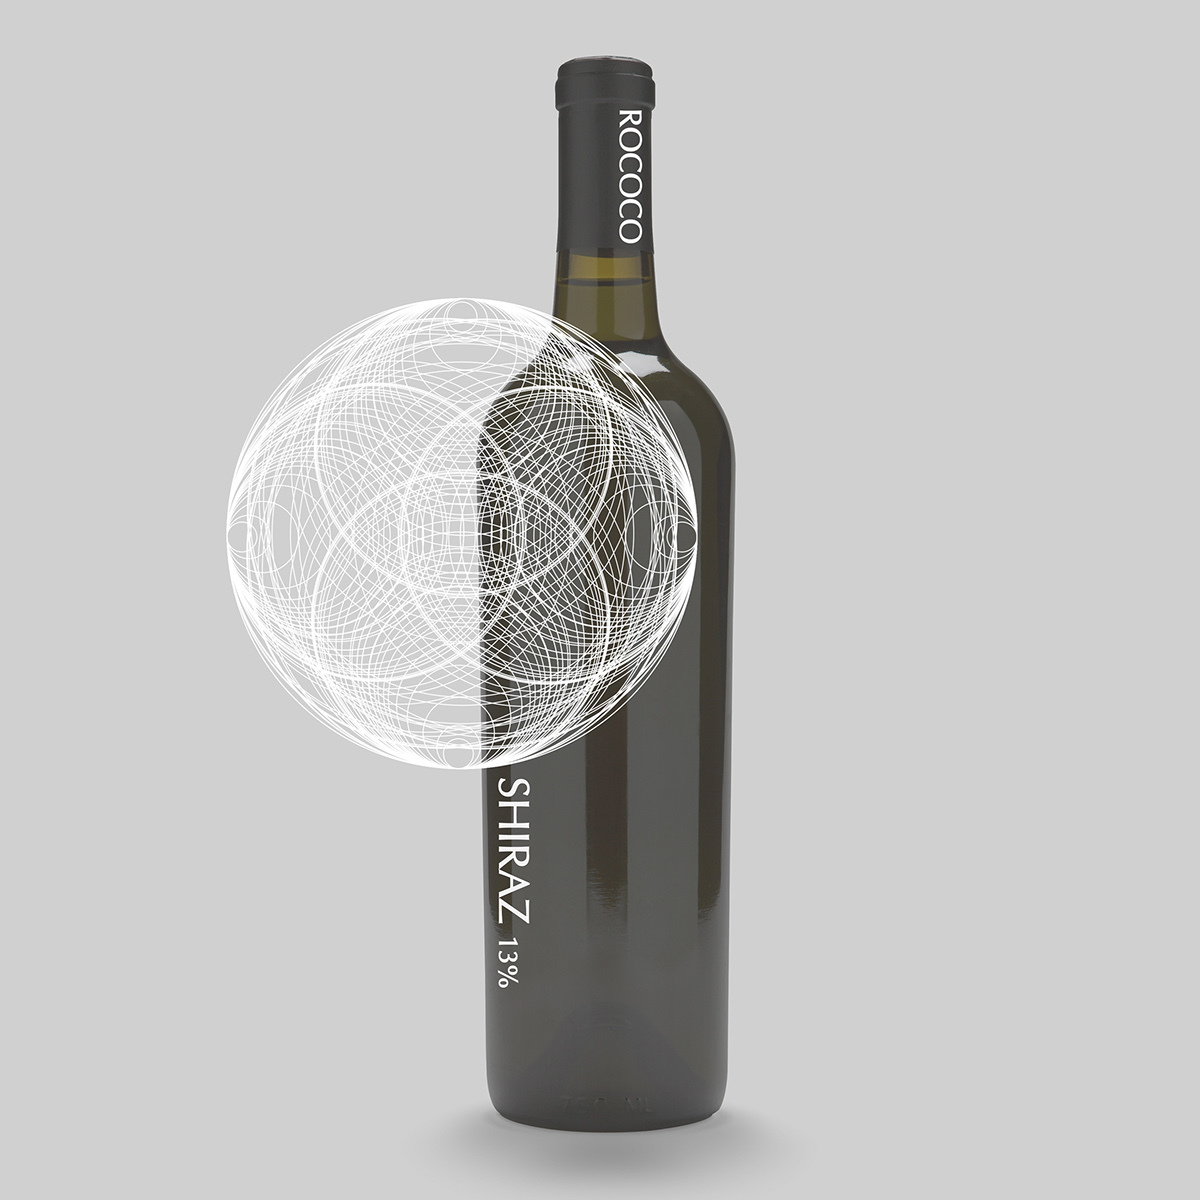 wine packaging design design concept graphics etching food and drink finest bottle alcohol